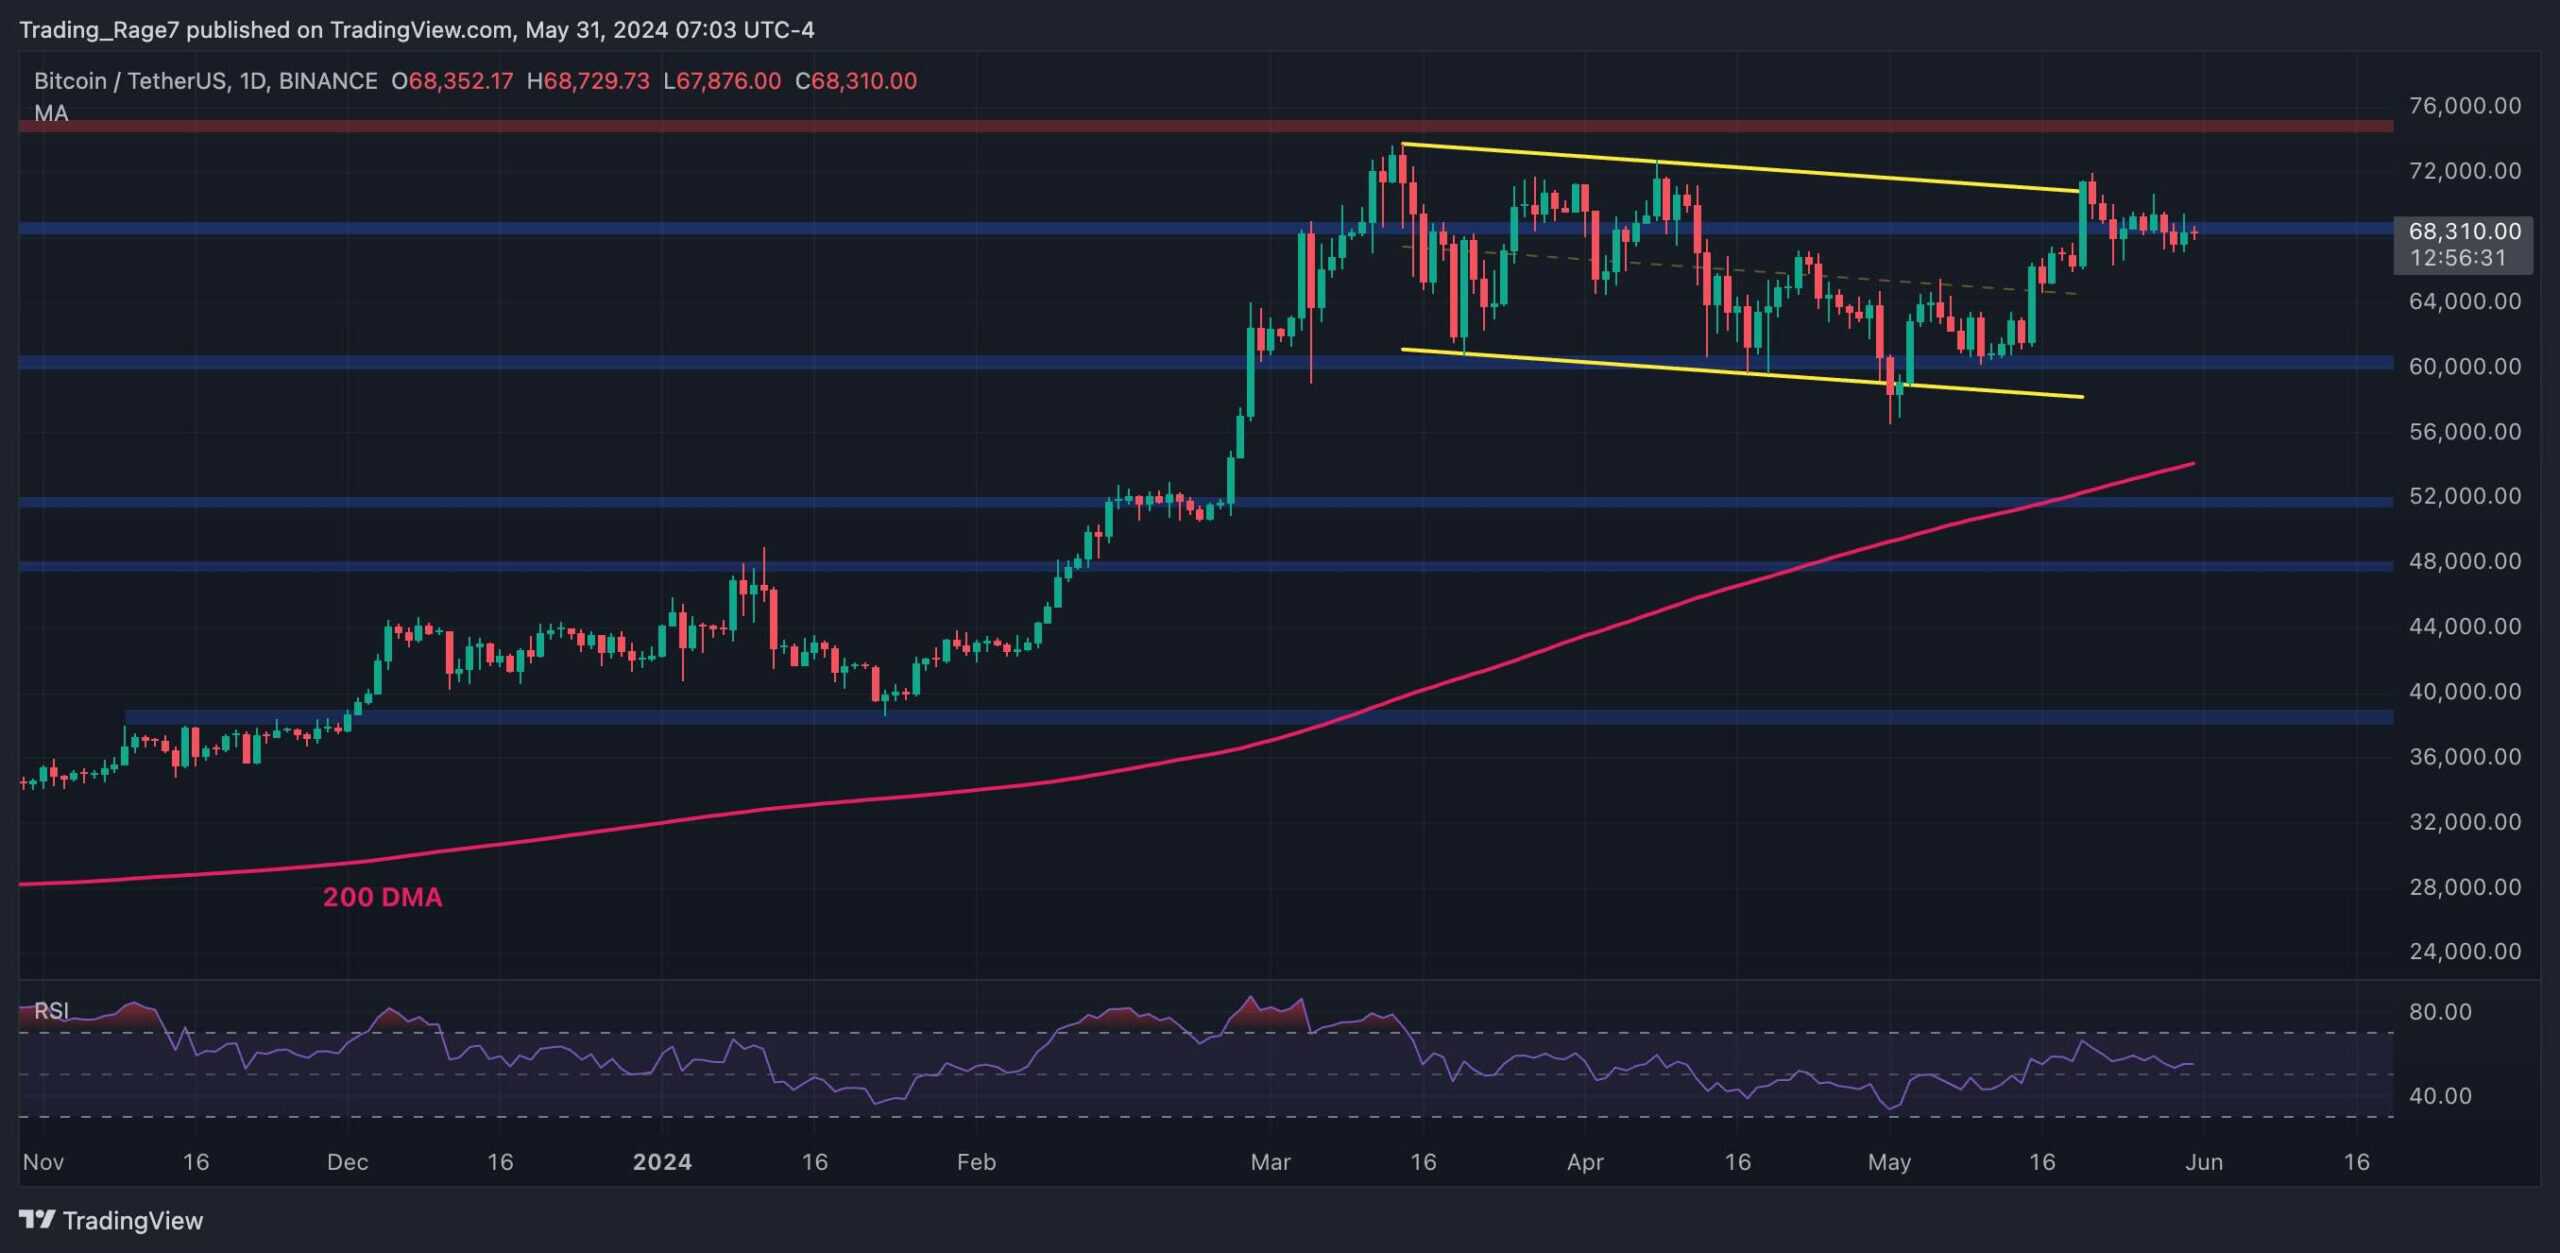 BTC Price Consolidation Continues but All Signs Point to a Run Toward New ATH: Bitcoin Price Analysis